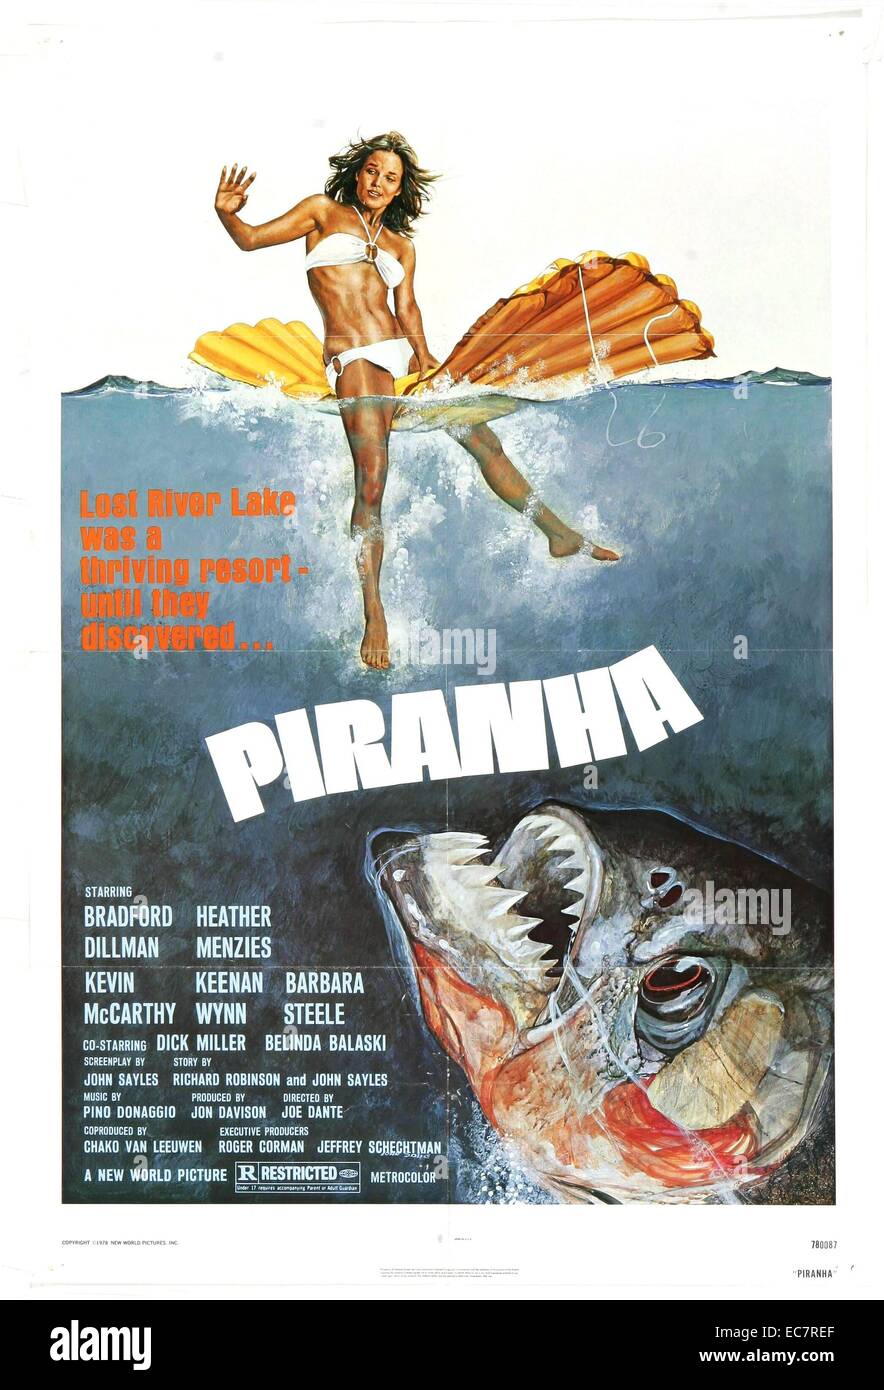 Piranha is a 1978 American B movie about a swarm of killer piranhas. It was directed by Joe Dante and starred Bradford Dillman, Heather Menzies. The film is a parody of the 1975 film Jaws and inspired a whole range of movies with a similar theme. Stock Photo